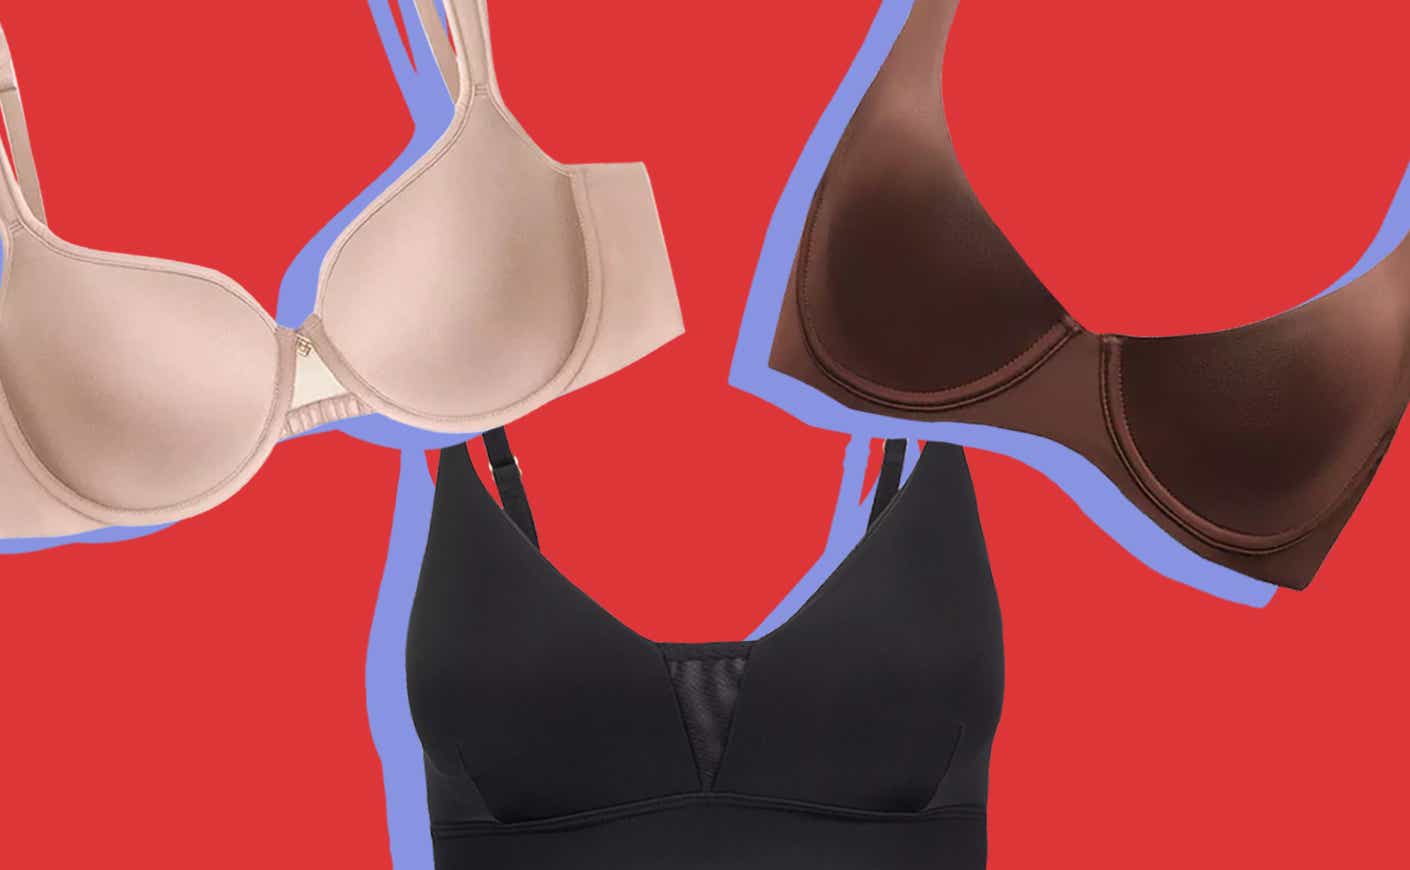 What is the best way to wash your bra? - Quora